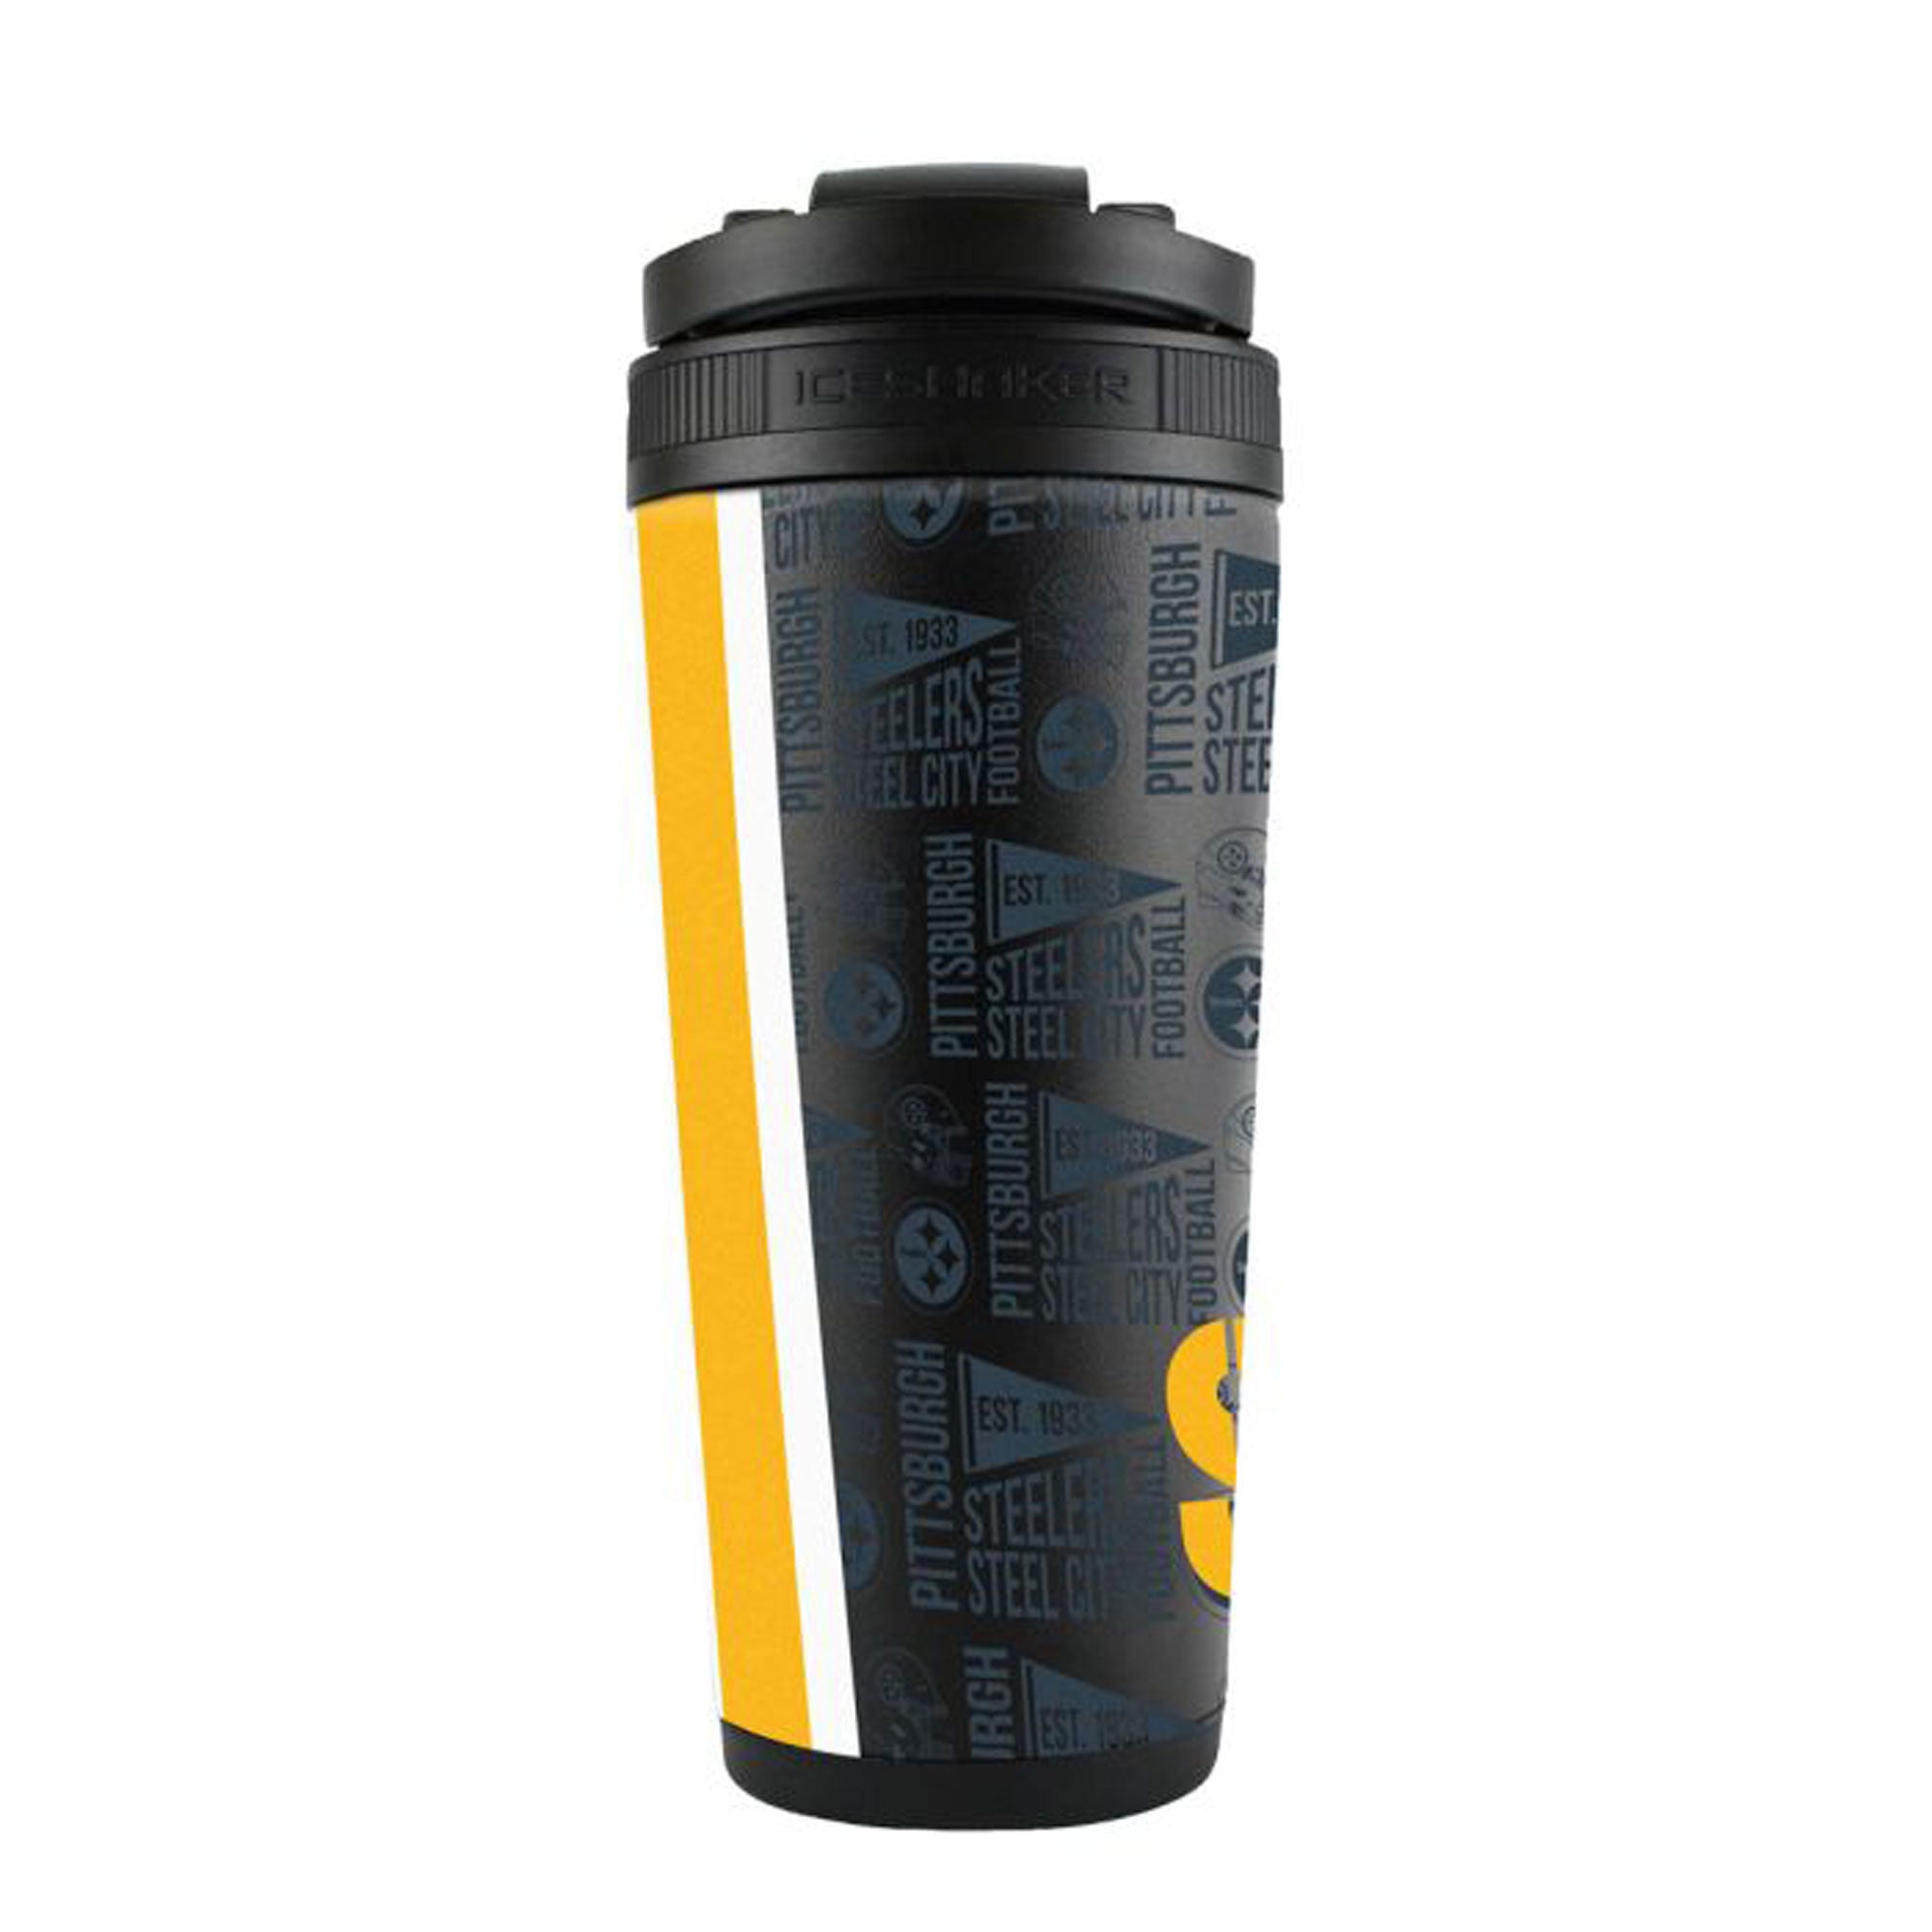 PITTSBURGH STEELERS NFL FOOTBALL 14 OZ DOUBLE WALLED TRAVEL TUMBLER NEW